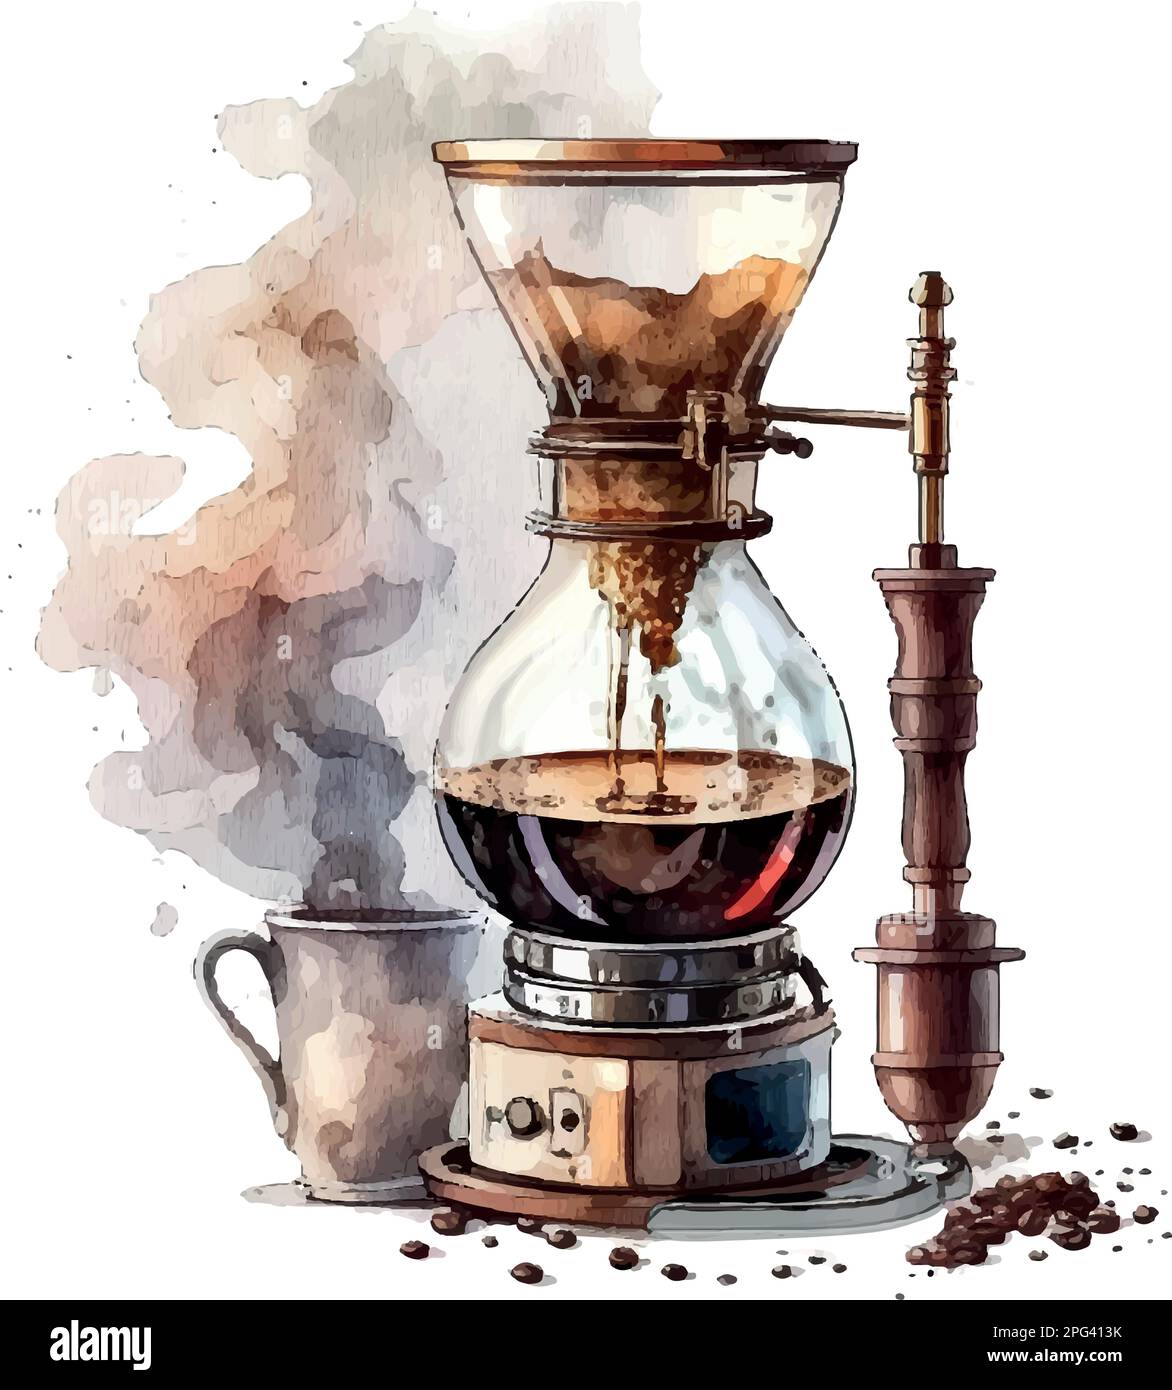 Japanese Siphon Coffee Maker And Coffee Grinder On Old Kitchen Table  Background It Is Very Fragrant And Aroma Because Filled With Fresh Coffee  Beans Stock Photo - Download Image Now - iStock